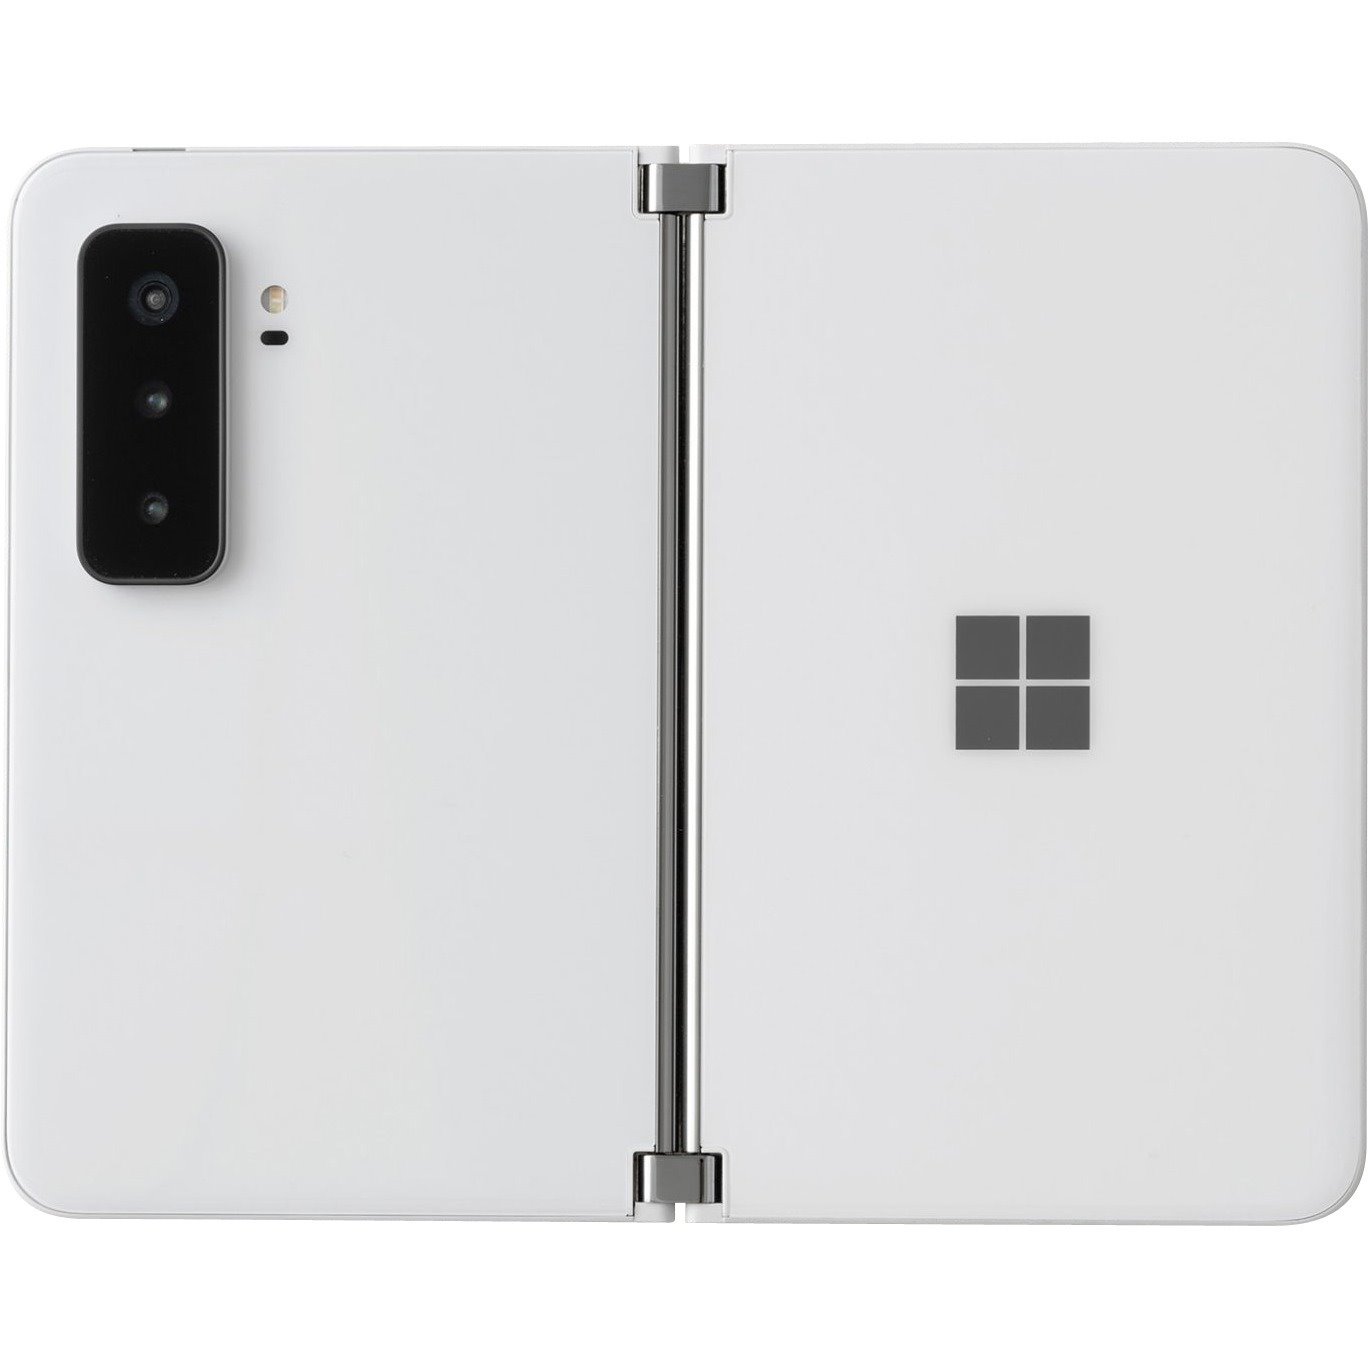 Microsoft Surface Duo 2 128 GB Smartphone - 21.1 cm (8.3") Yes AMOLED 2688 x 1892 - Octa-core (Kryo 680Single-core (1 Core) 2.84 GHz + Kryo 680 Triple-core (3 Core) 2.42 GHz + Kryo 680 Quad-core (4 Core) 1.80 GHz) - 8 GB RAM - Android 11 - 5G - Glacier